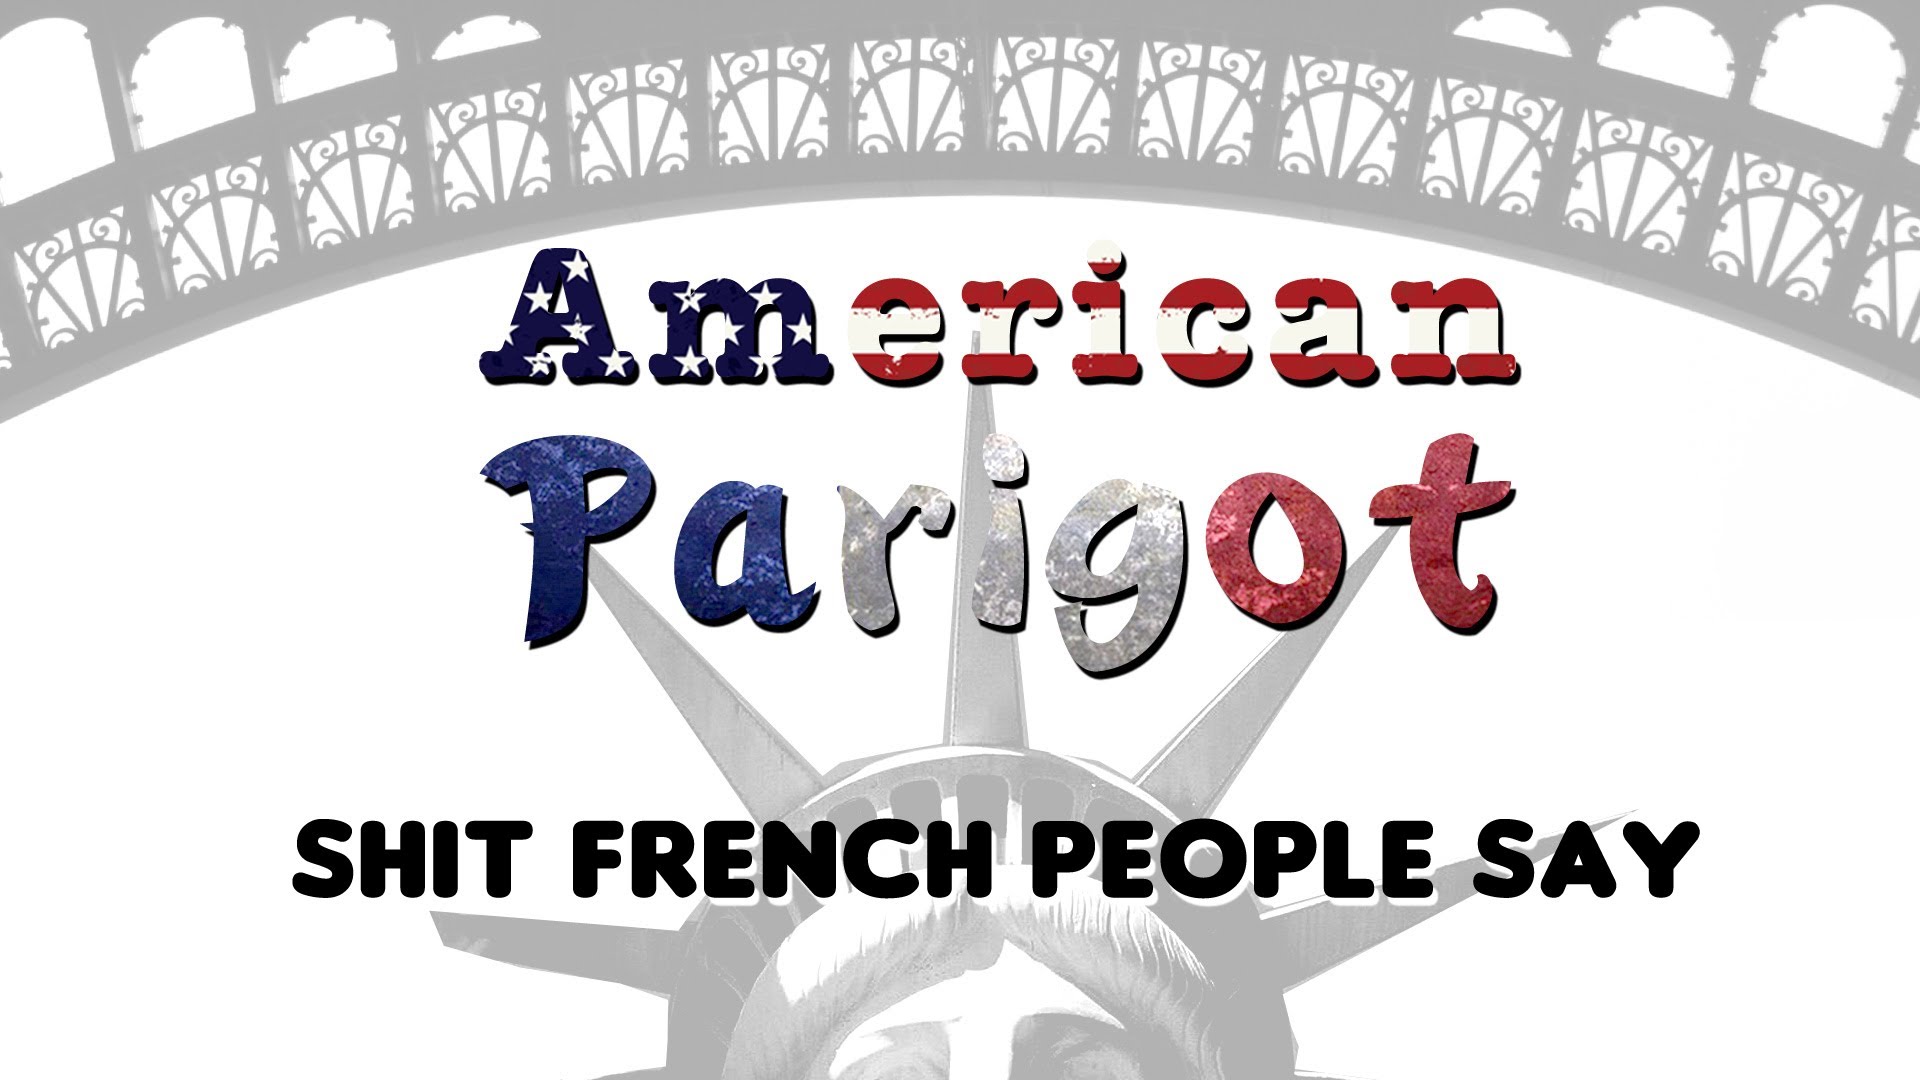 Shit French People Say